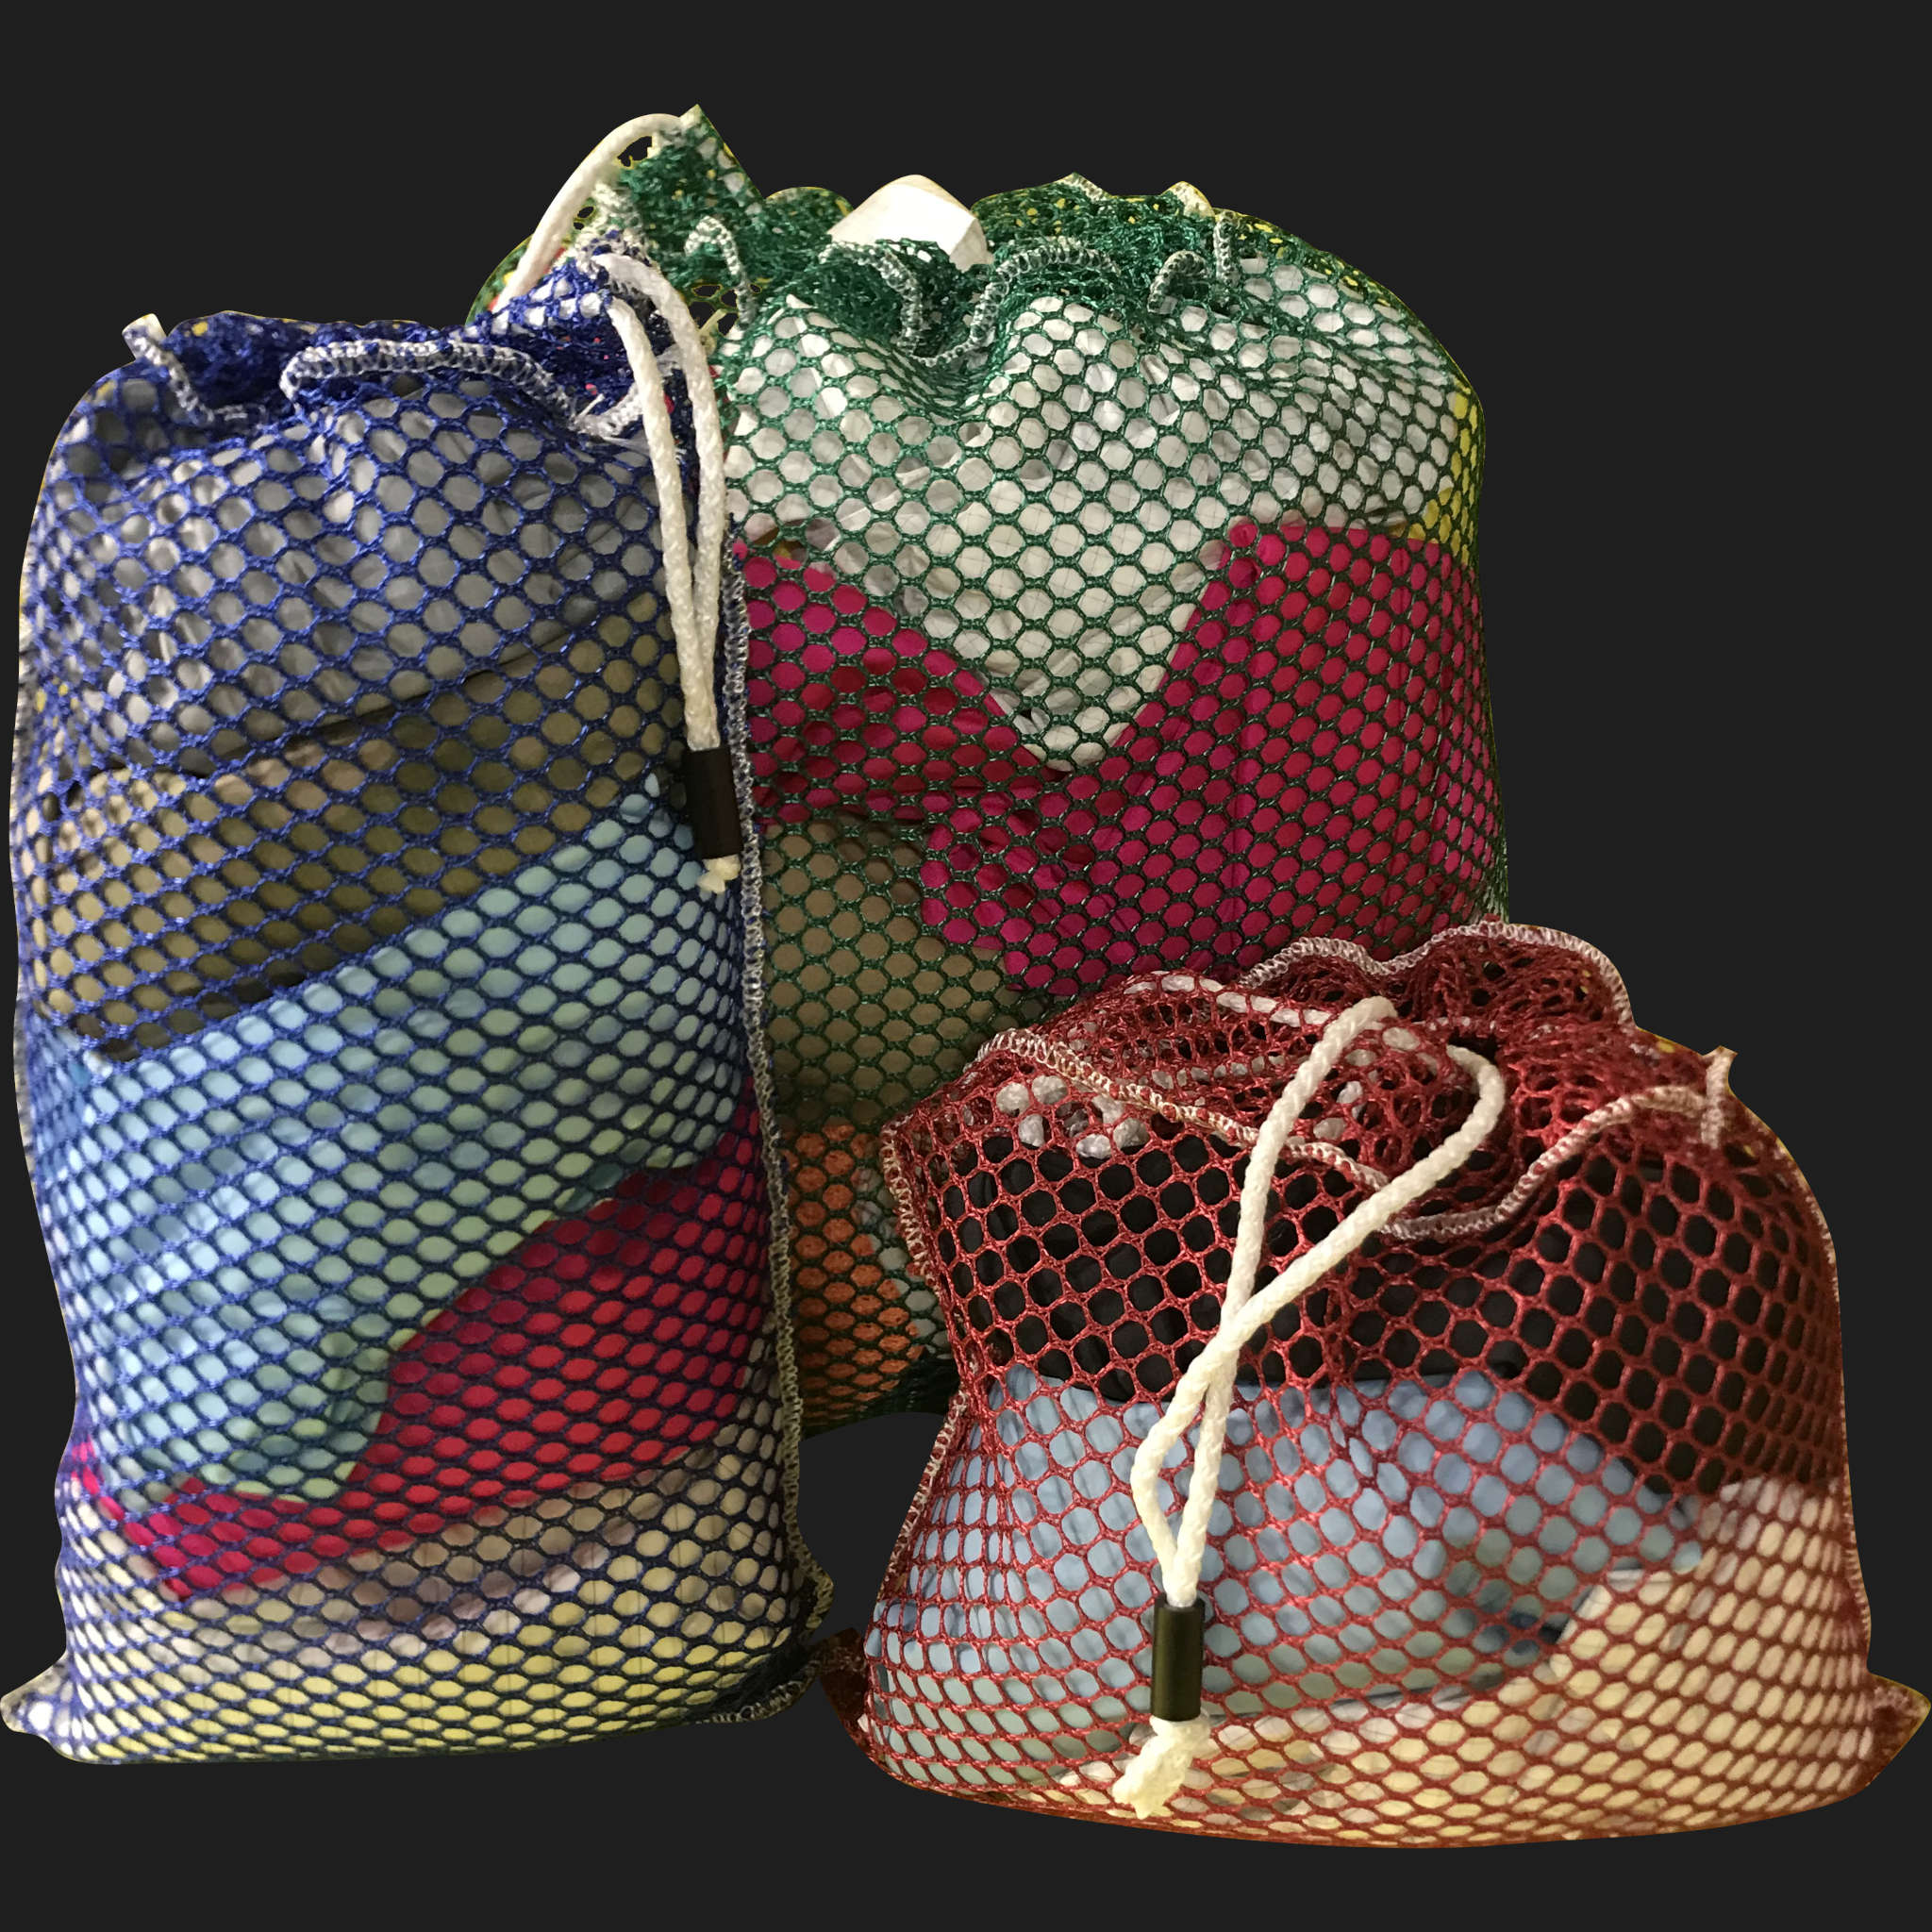 54" x 62" Customized Mesh-Net-Laundry Bags Heavy Duty with Cord and barrellock closure